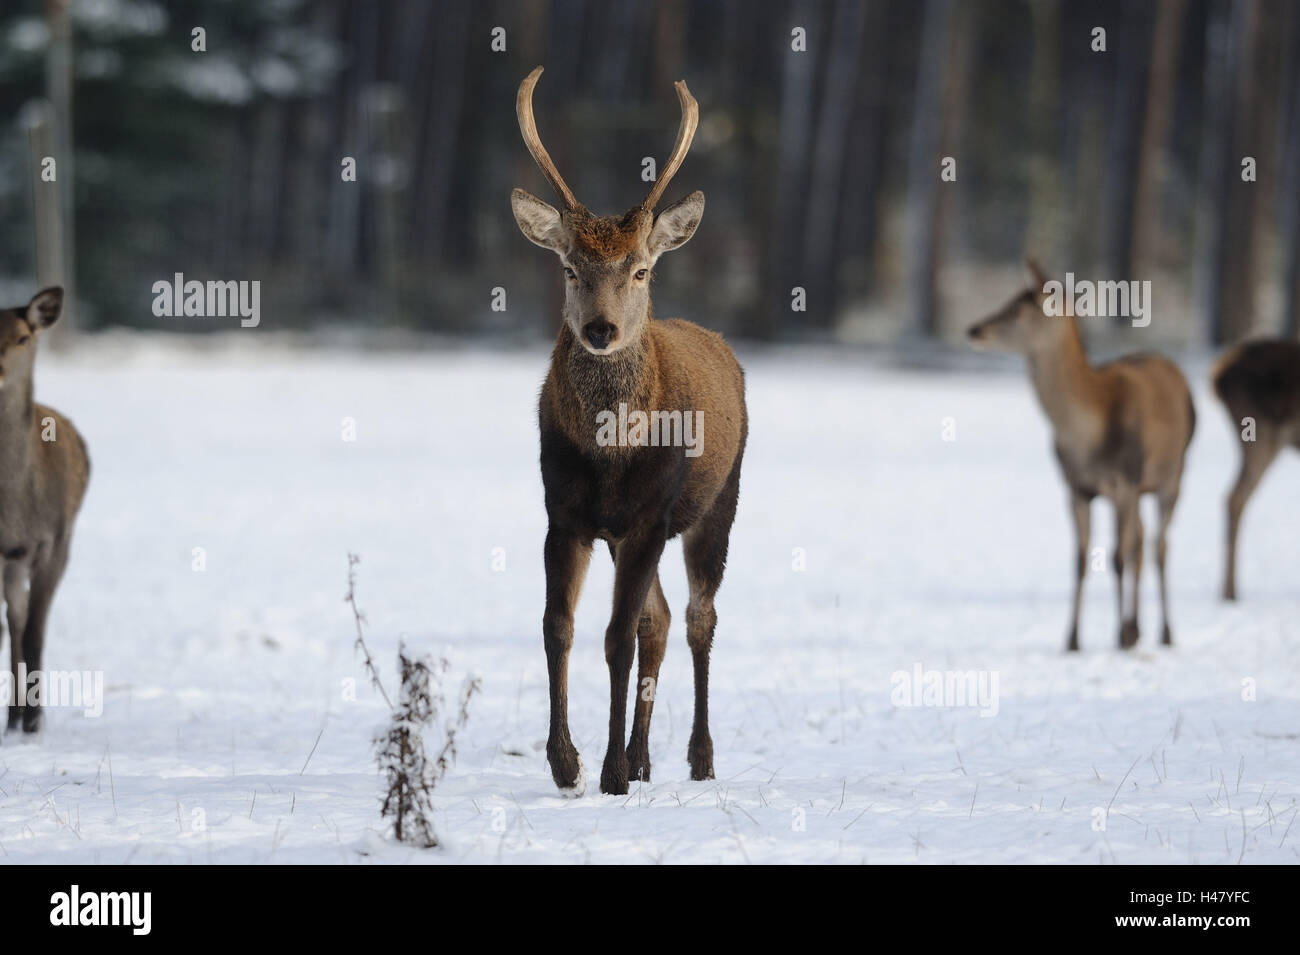 Red deer, Cervus elaphus, front view, walking, meadow, edge of the forest, snow, winter, looking at camera, Stock Photo